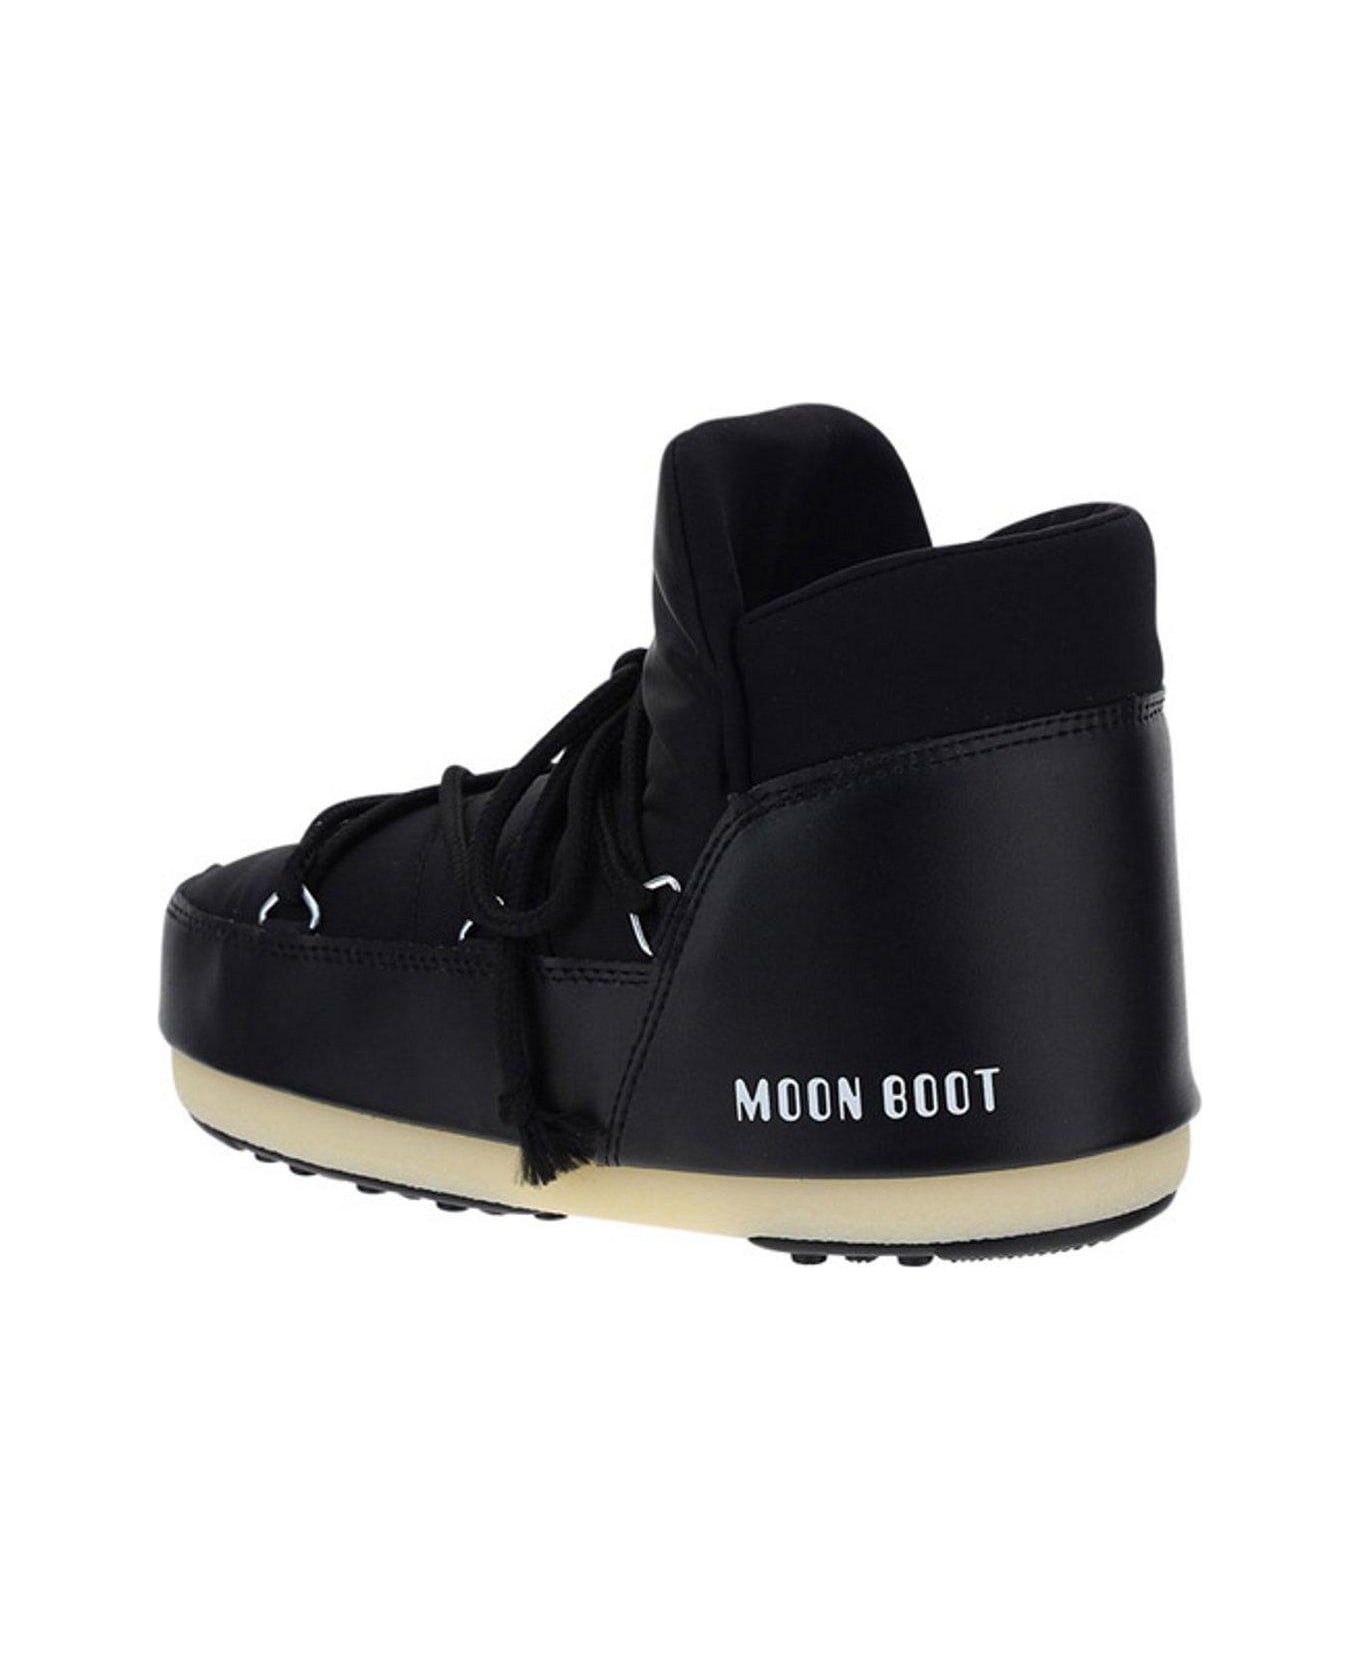 Moon Boot Logo Printed Round Toe Boots - Black